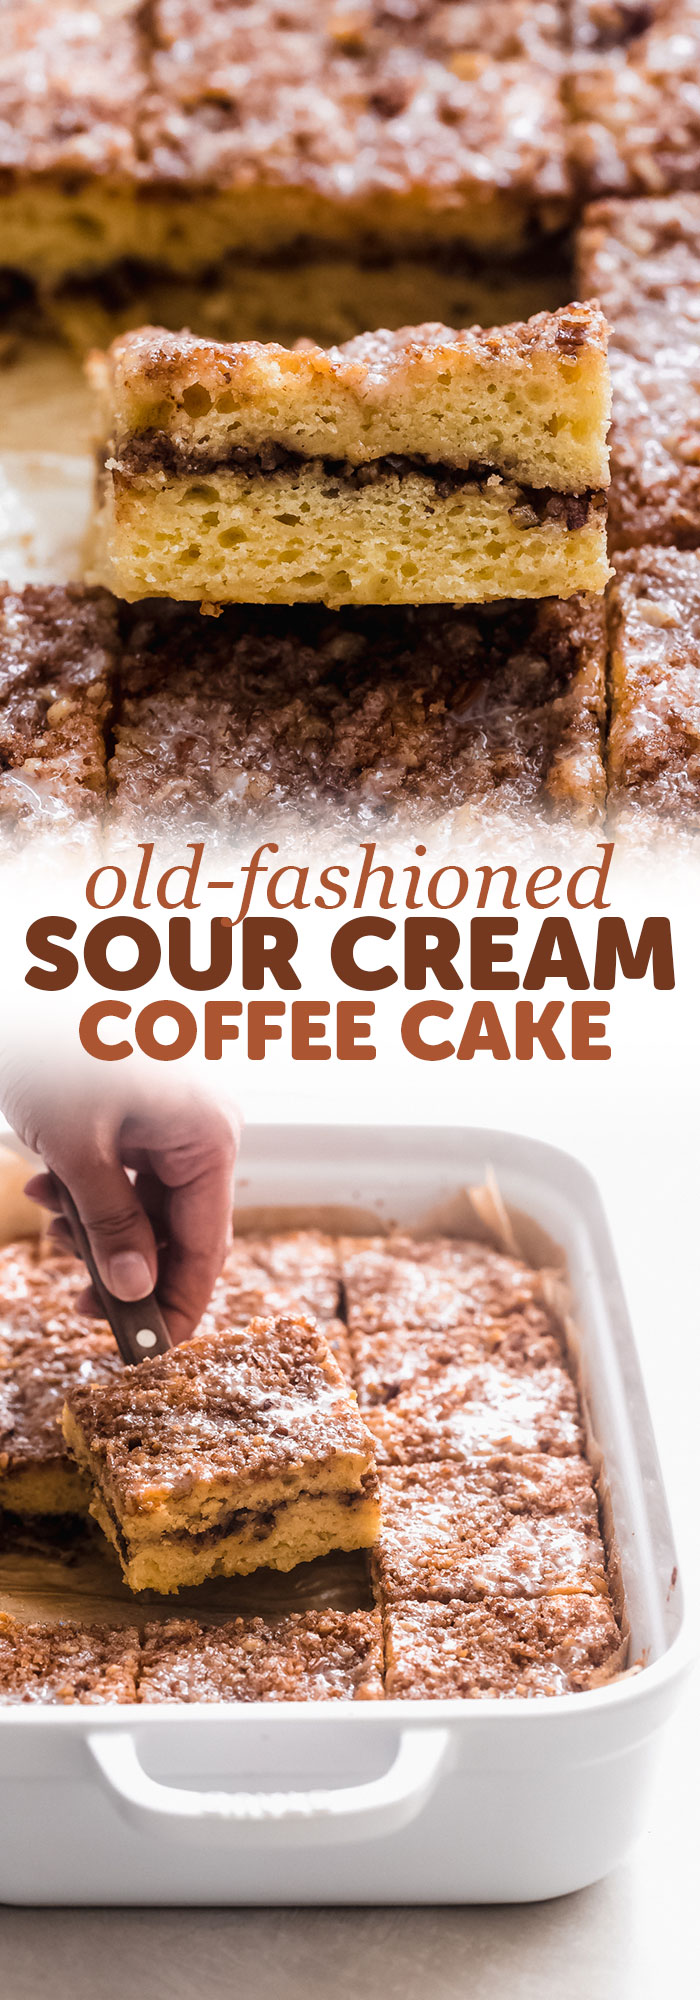 Old-Fashioned Sour Cream Coffee Cake - an easy coffee cake with a cinnamon pecan filling and topping! So good and so easy to make! #cinnamoncoffeecake #coffeecake #sourcreamcoffeecake #cake #dessertrecipes | Littlespicejar.com